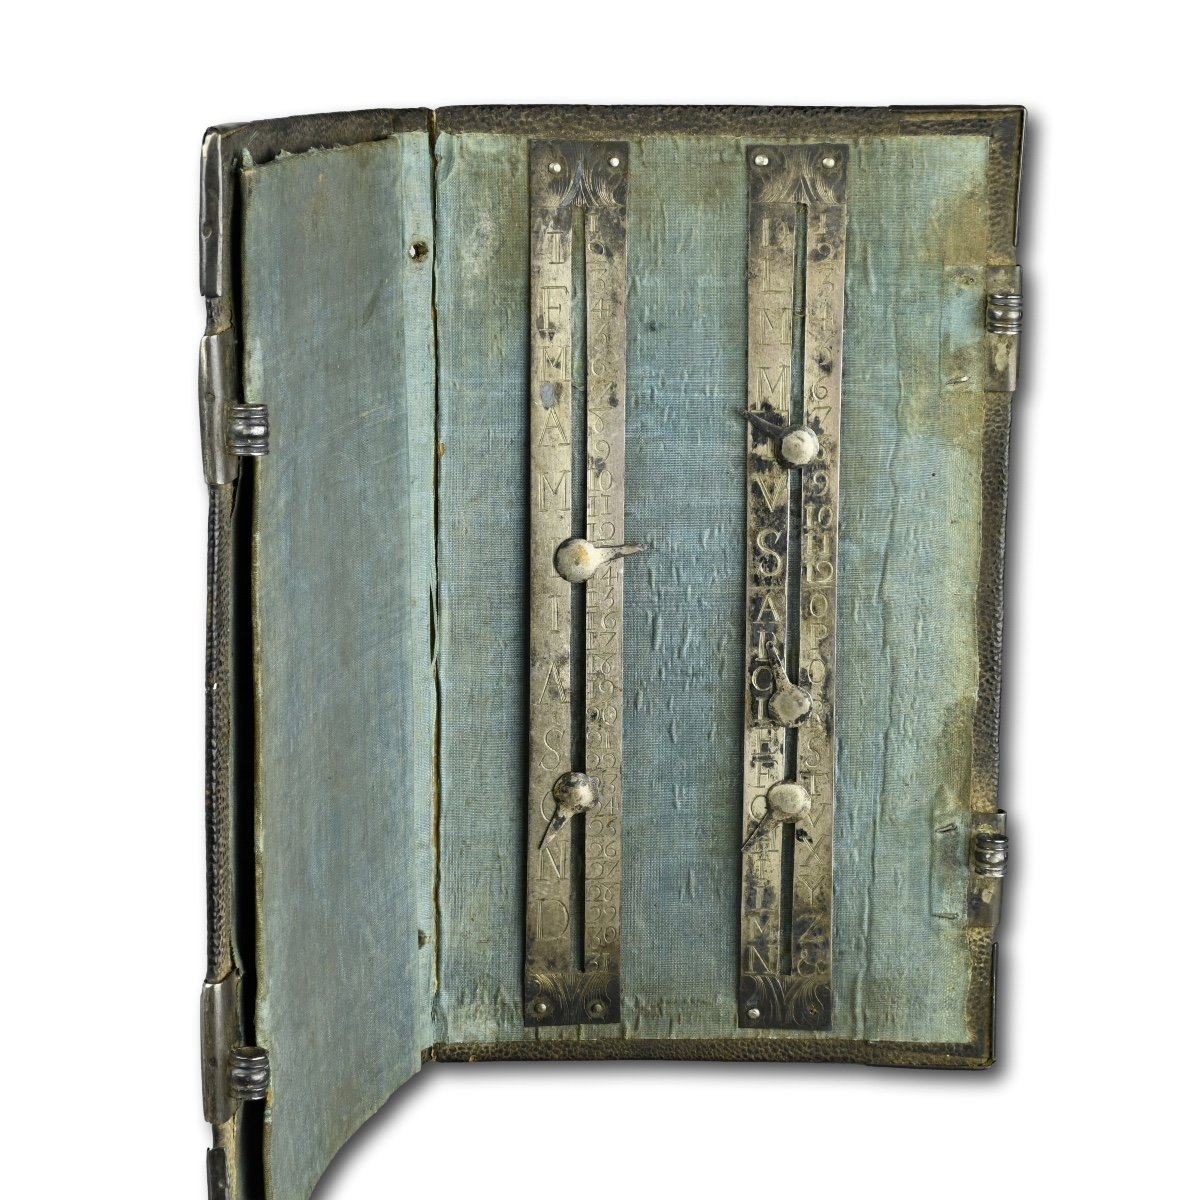 Leather Binding With Silver Mounts And Internal Calendar. French, 18th Century.-photo-4